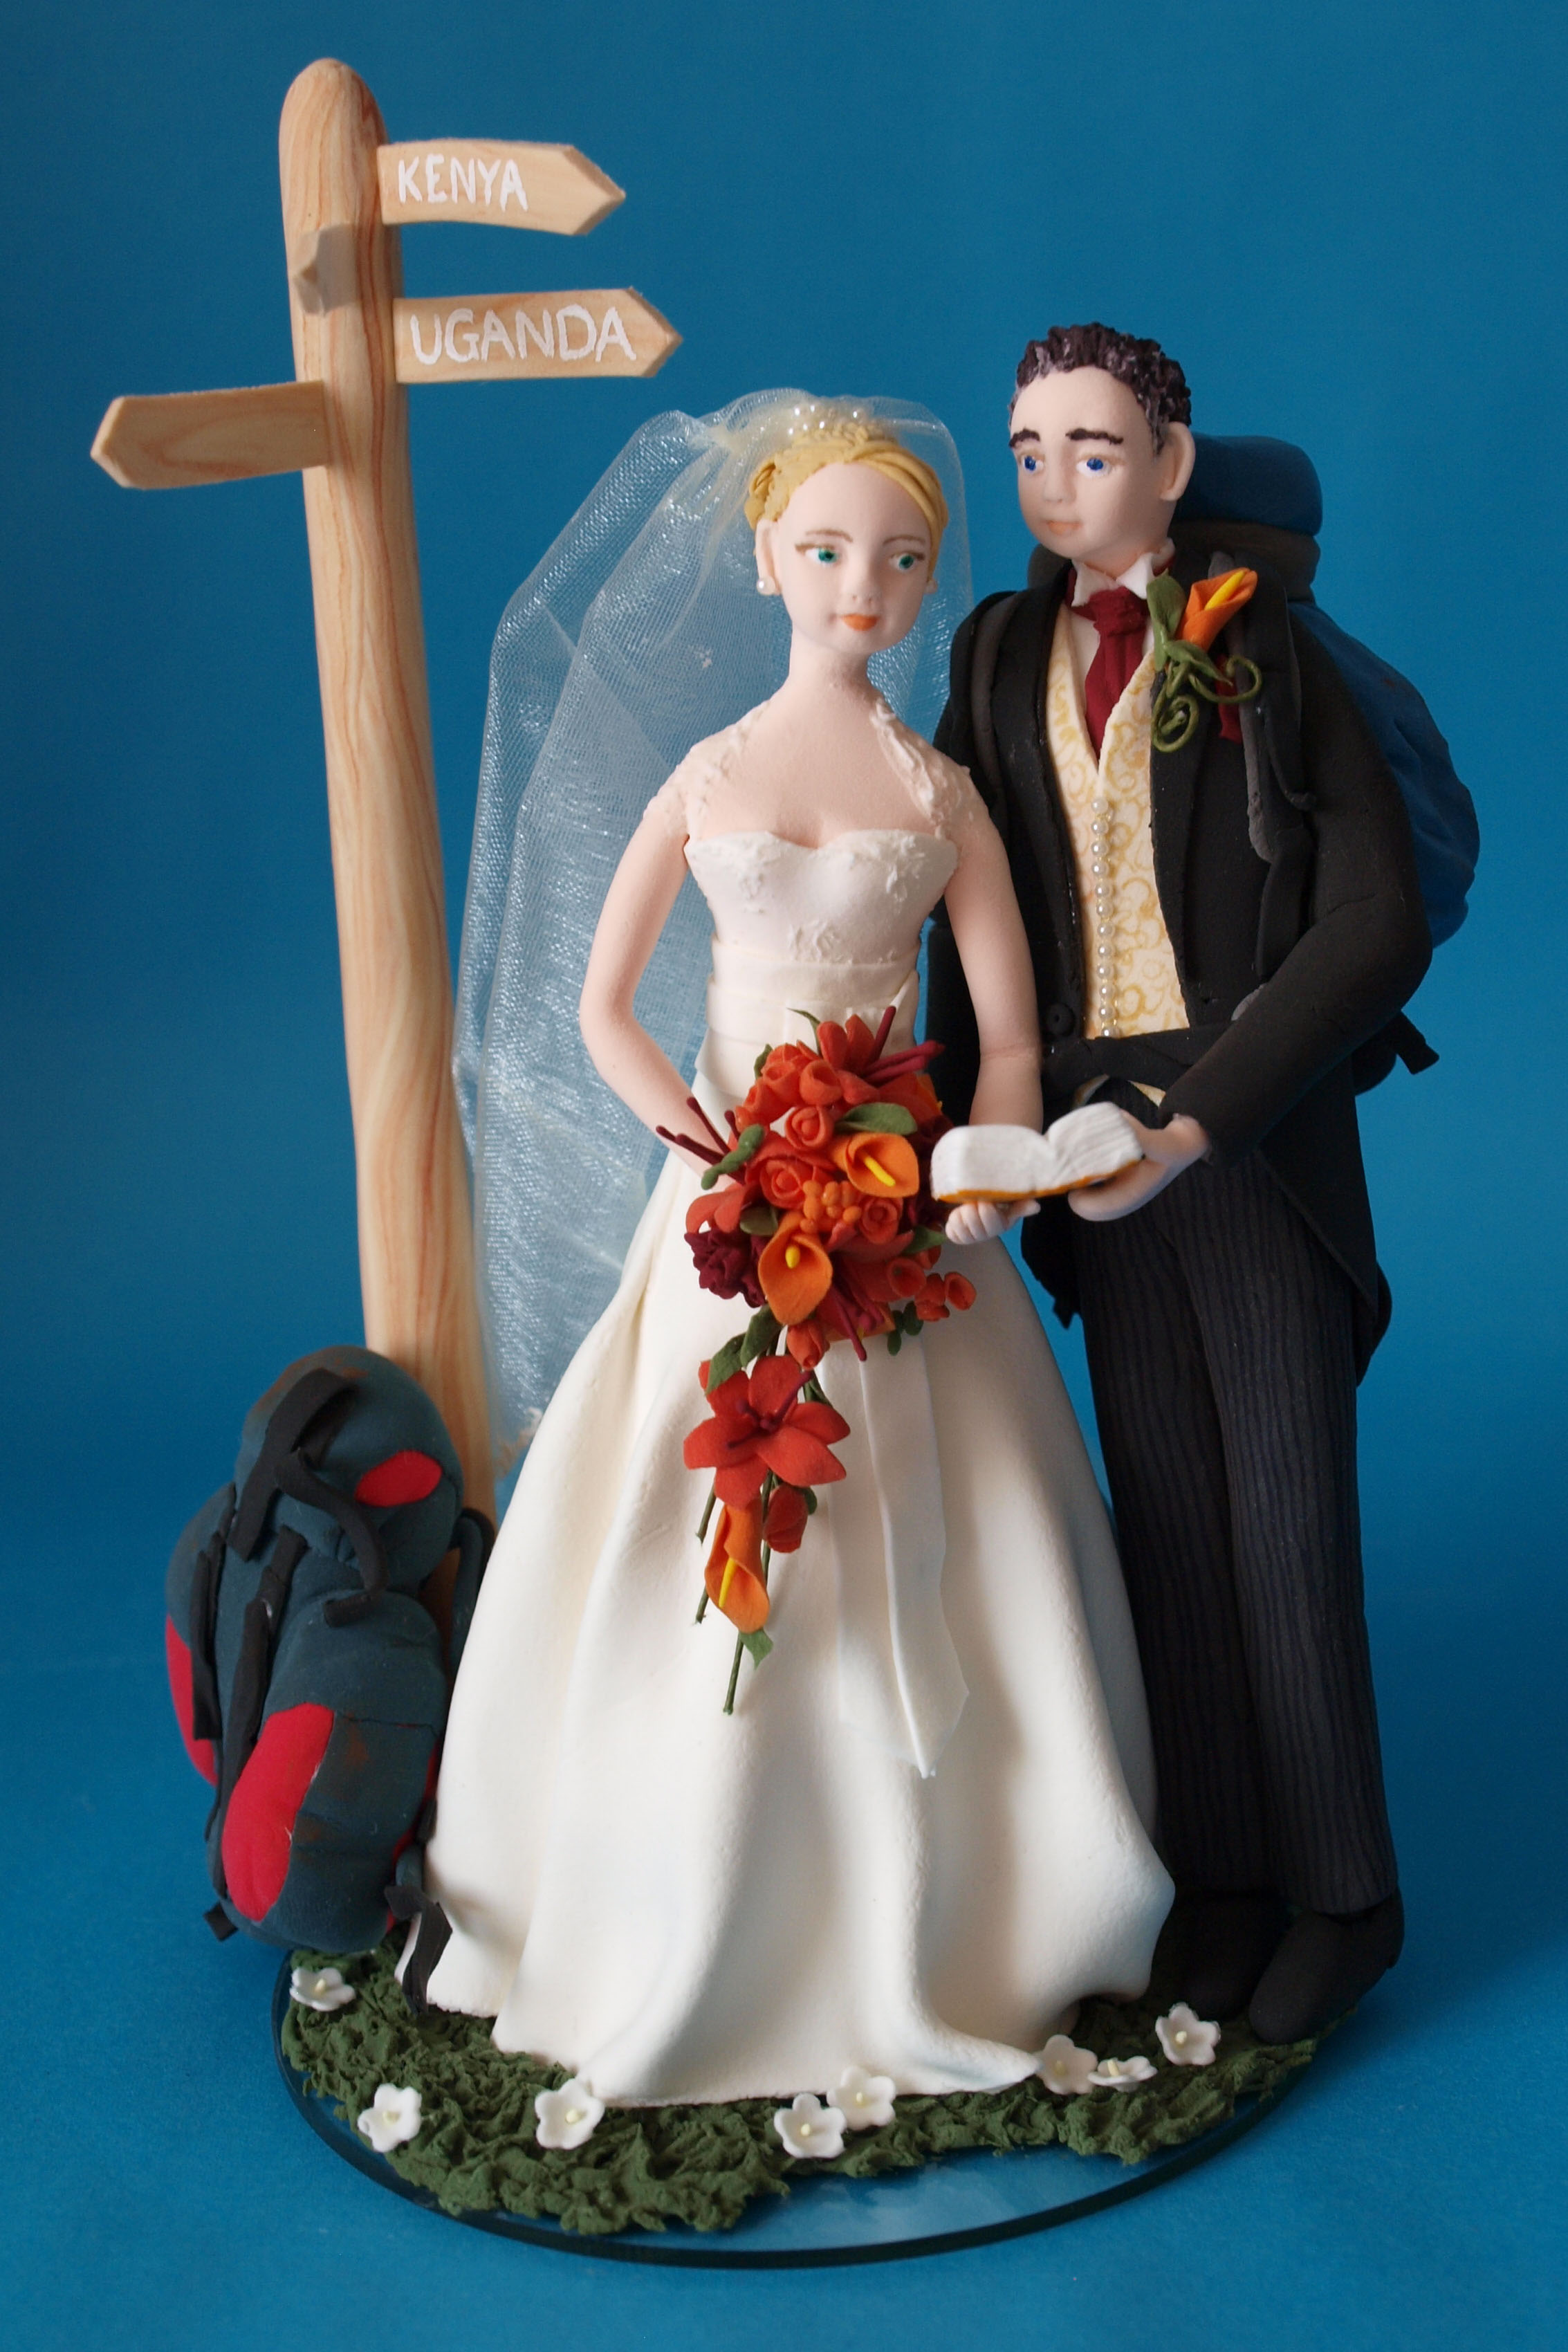 Backpacking bride and groom wedding cake topper by Louisa Hill